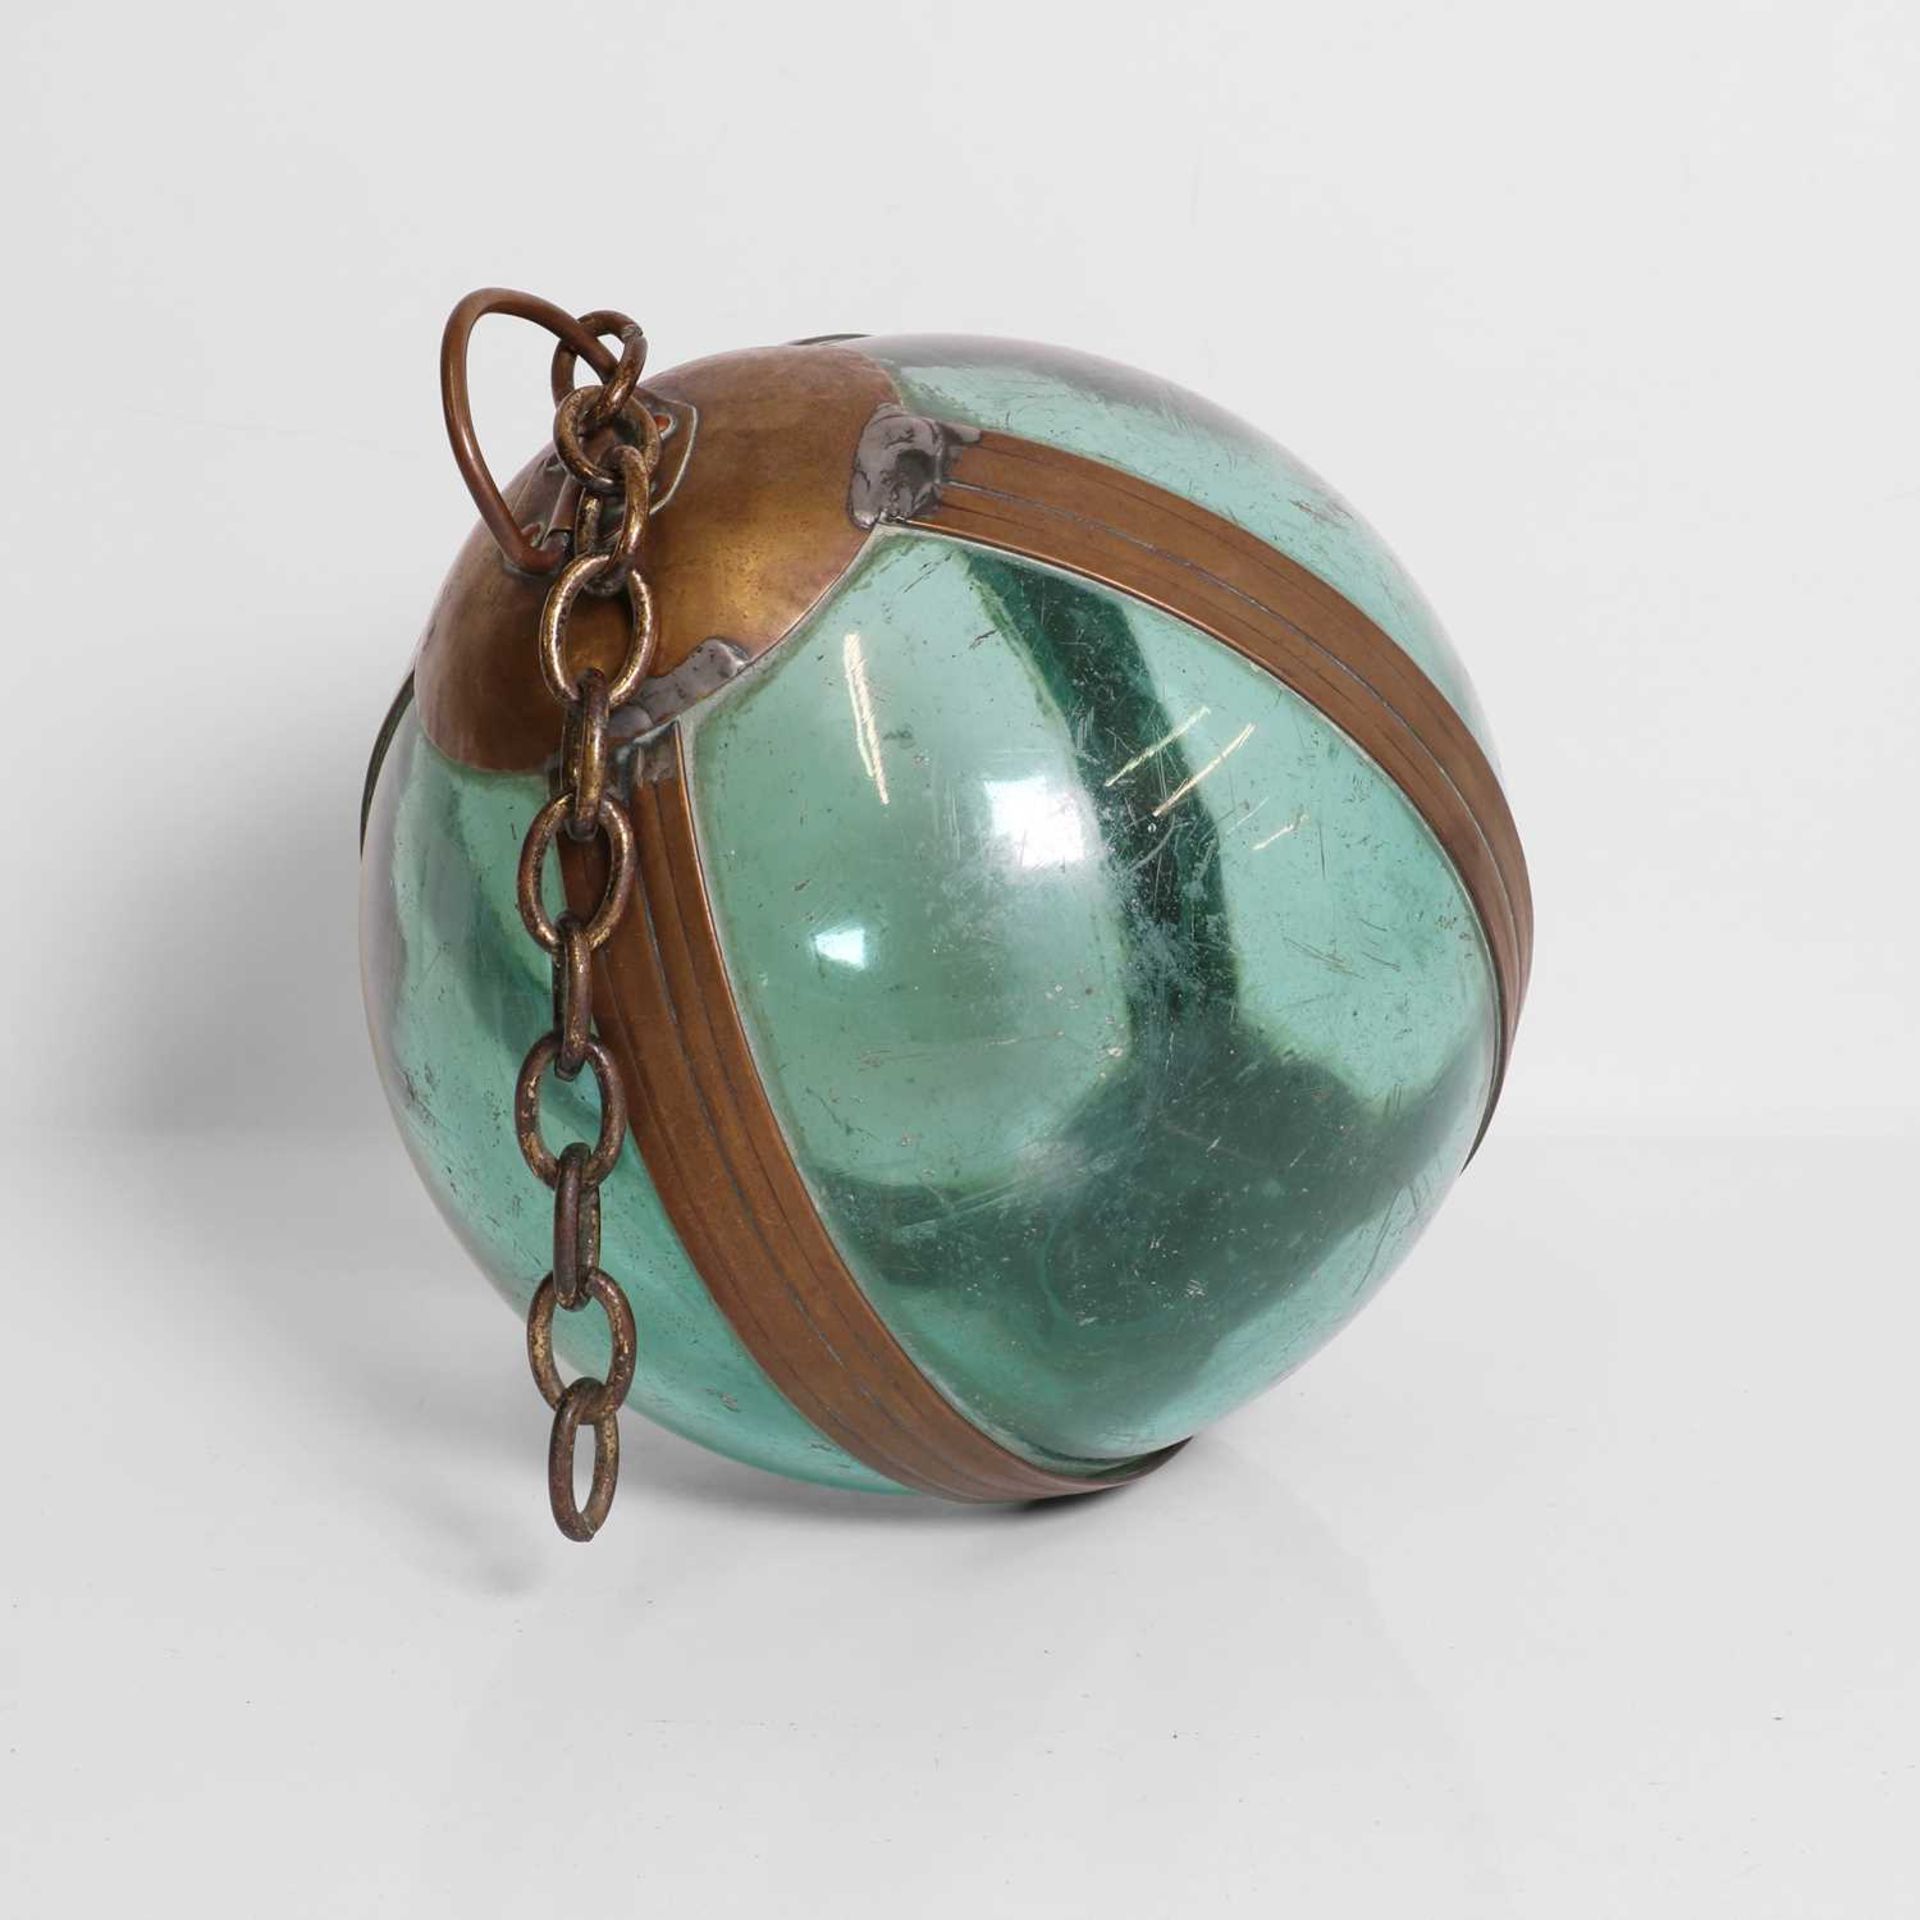 A brass-mounted pale-green glass buoy or fishing float, - Image 2 of 7